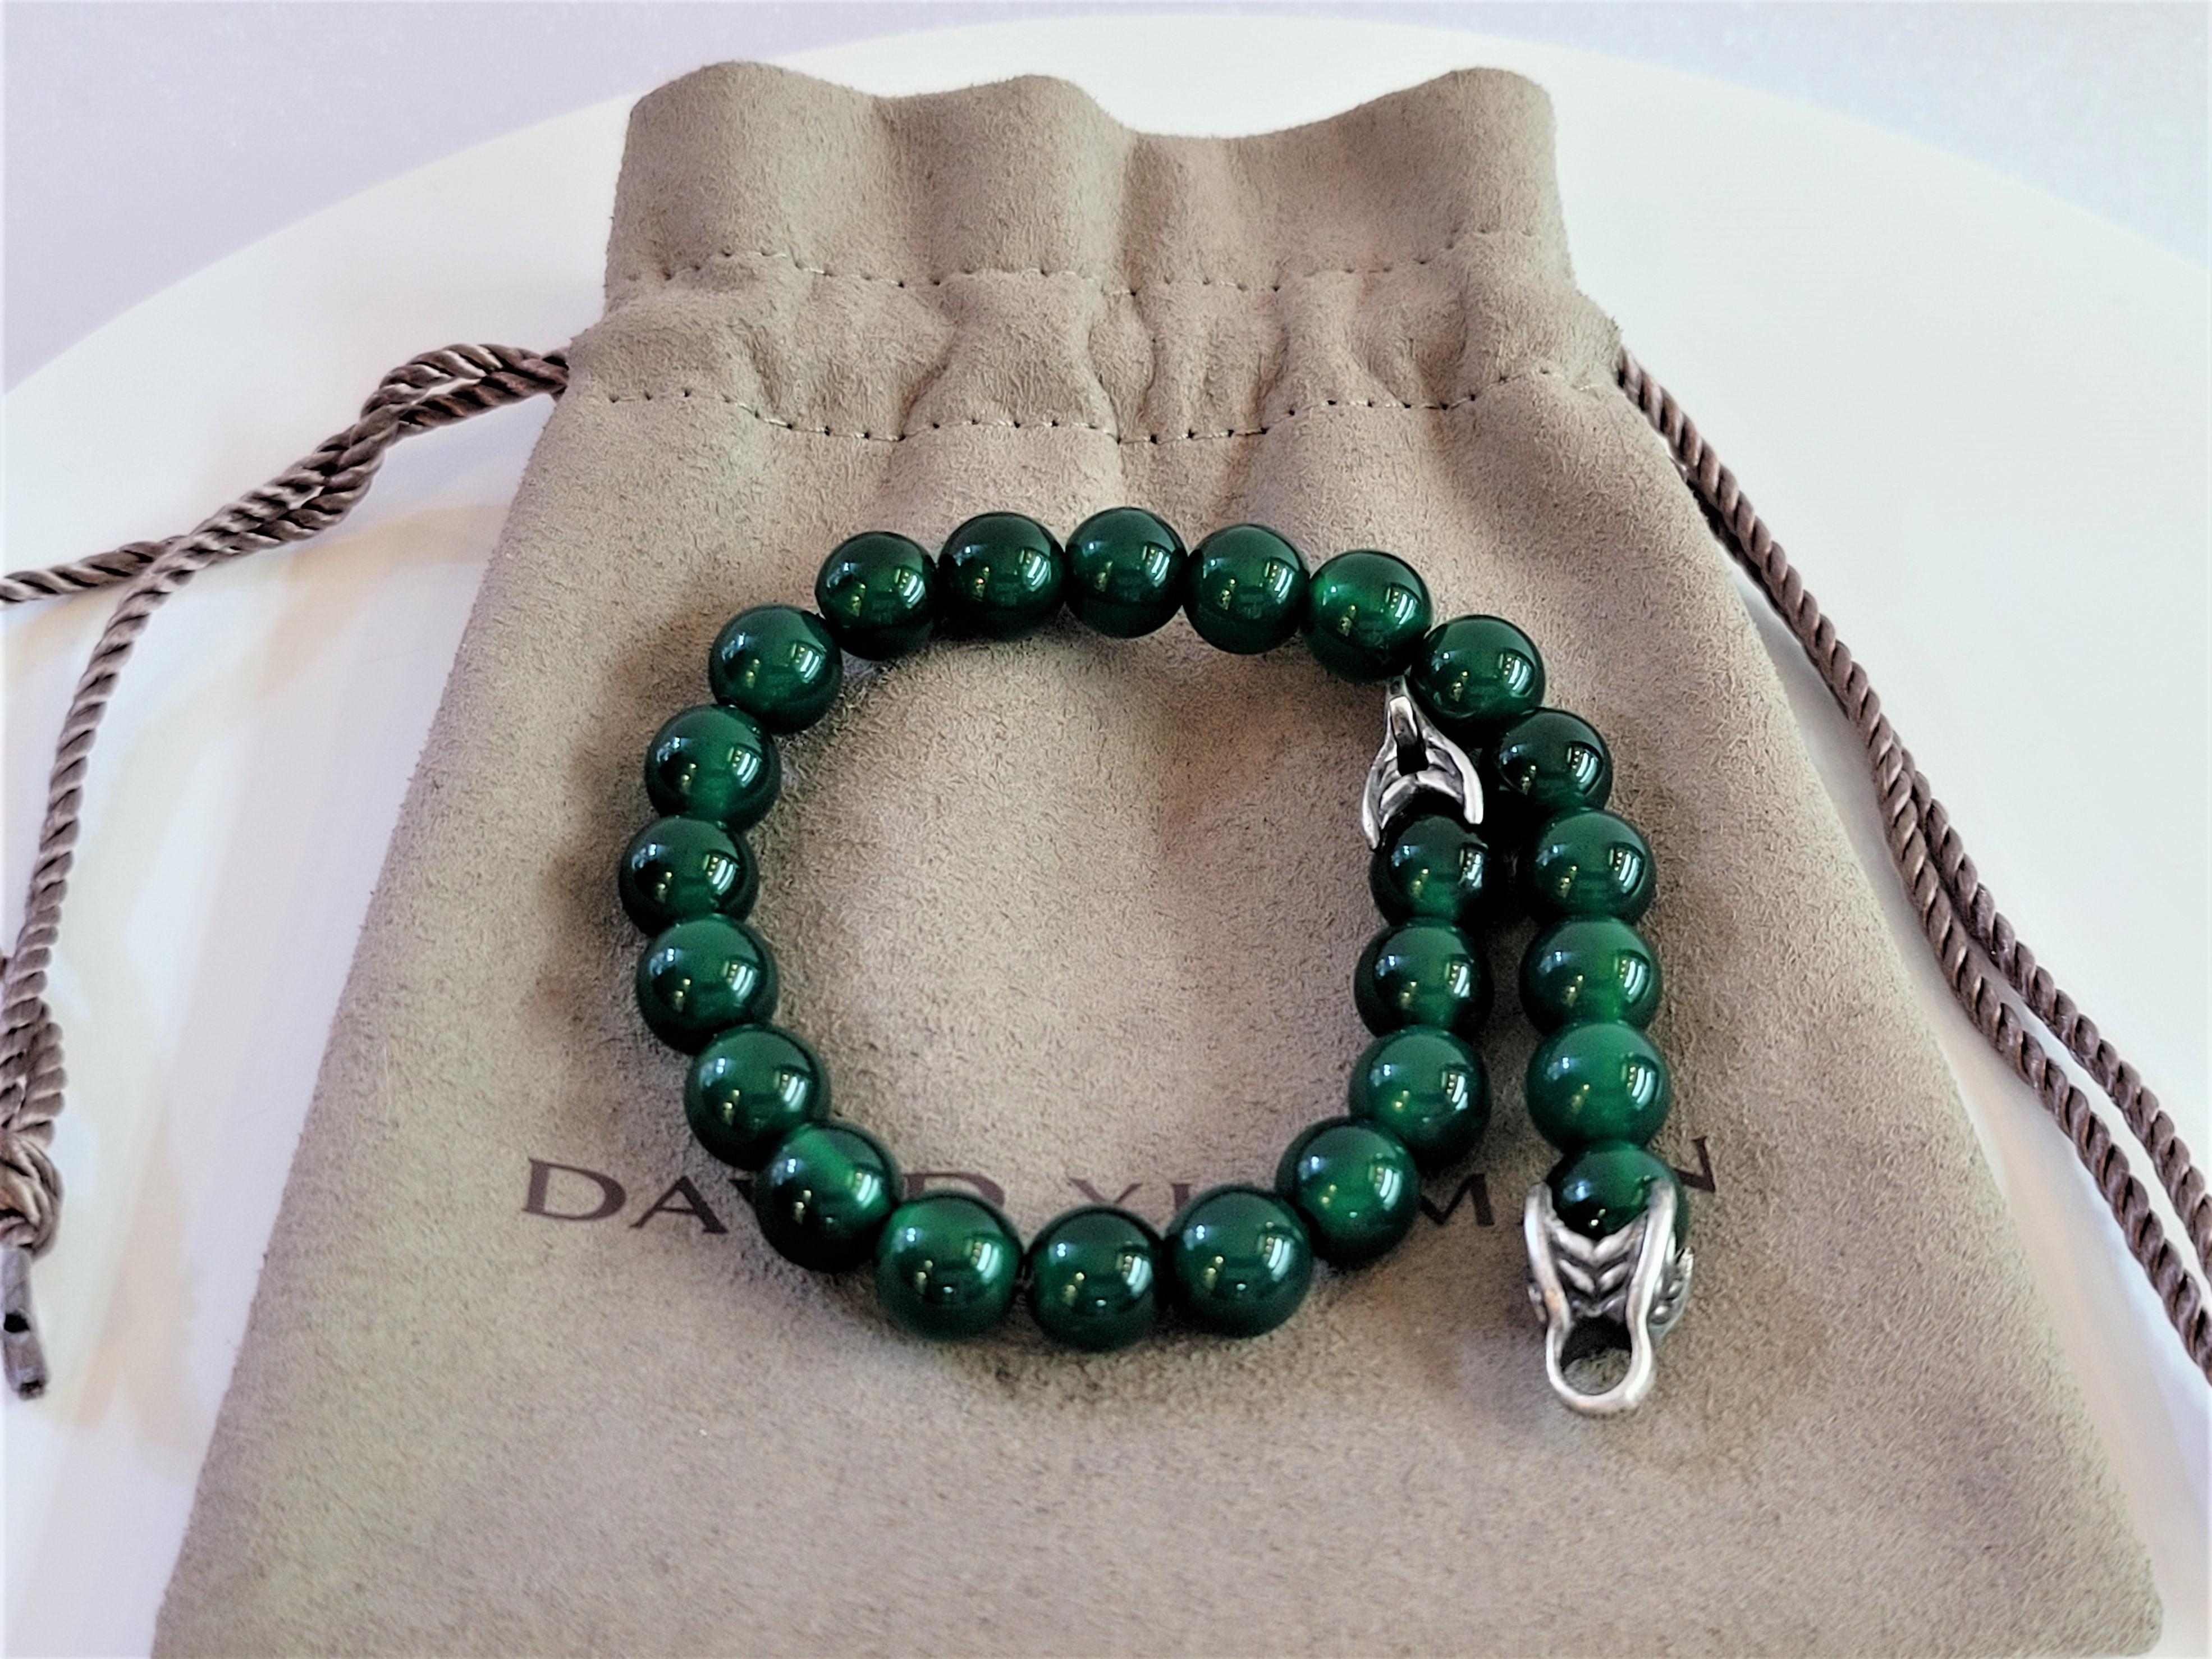 David Yurman Green Onyx Sterling Silver Spiritual Bead Bracelet 8mm In New Condition For Sale In New York, NY